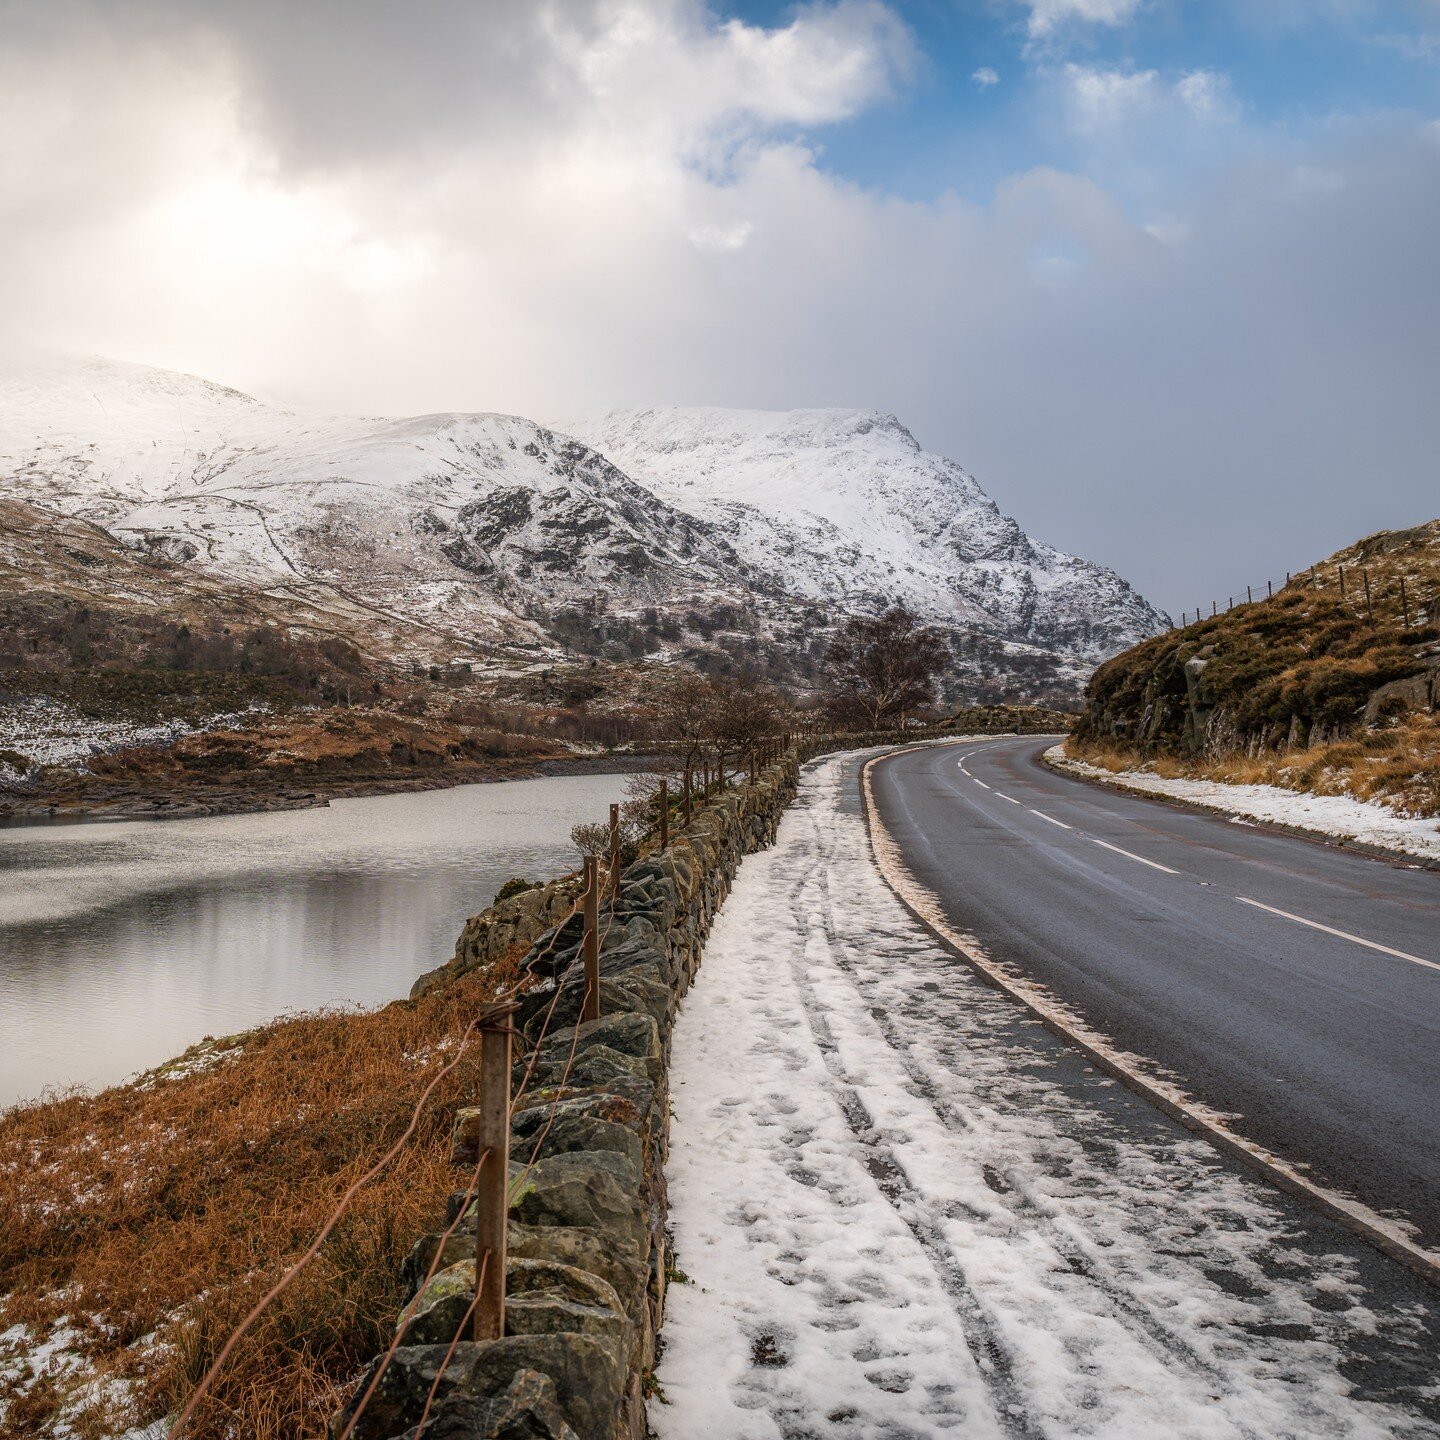 A drive through Snowdonia before today's rain came.
-
-
-
-
#snowdonia 
#snowdonianationalpark 
#snowdoniagram 
#northwales 
#northwalestagram 
#northwalesinstagram 
#snow 
#mountainscape 
#winter 
#sonya7iii 
#tamron2875 
#landscapephotography